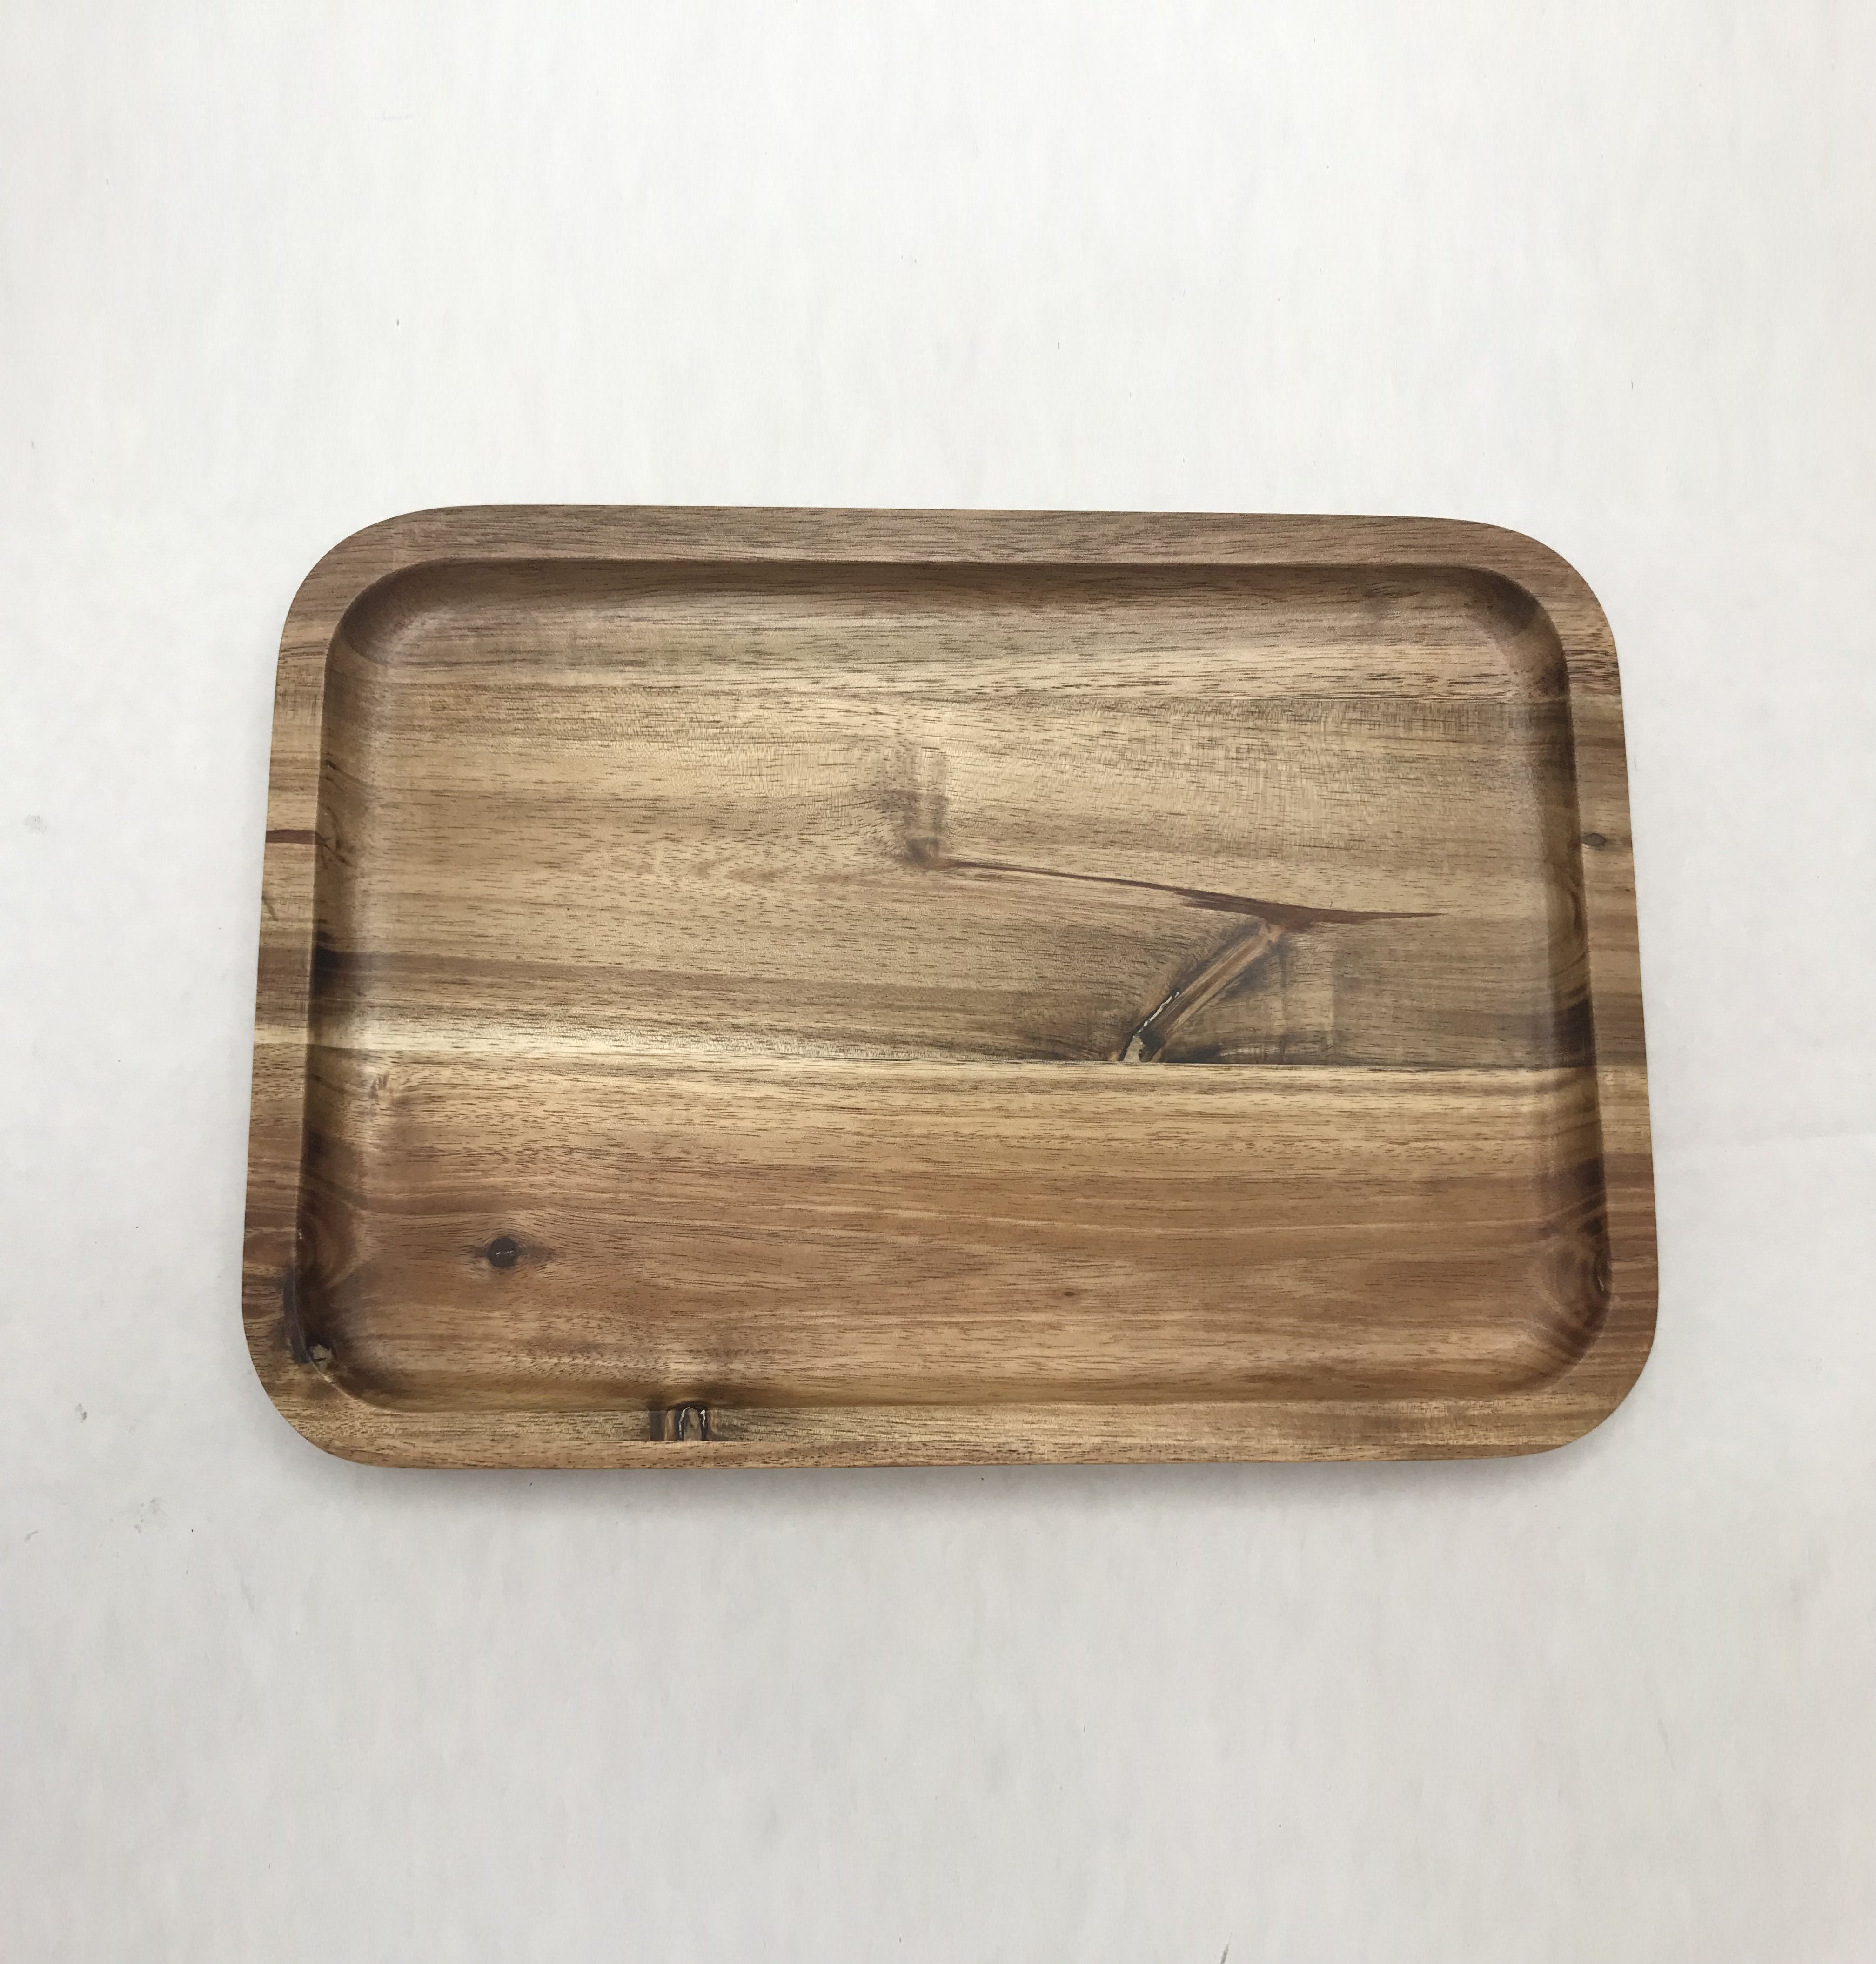 Set of 3 Acacia 10" Rectangle Serving Trays